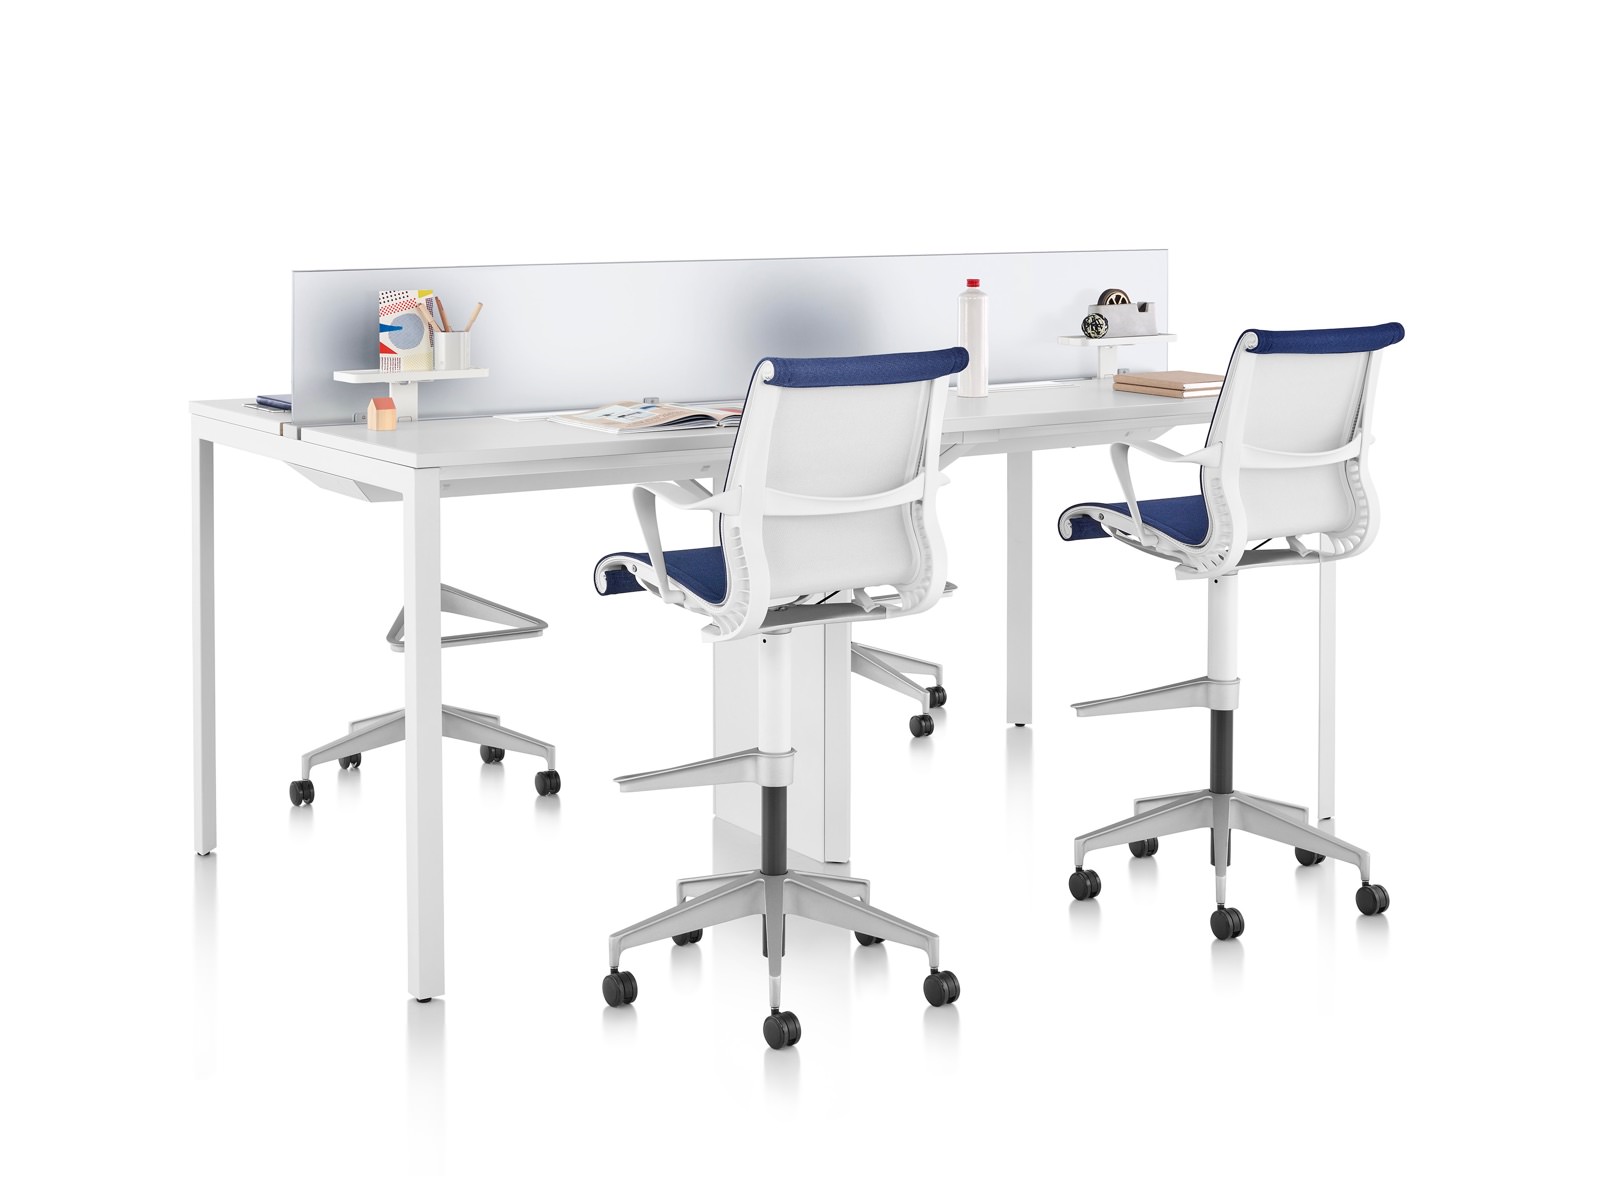 Four short-term workpoints created by a high Layout Studio table and blue Setu Stools.